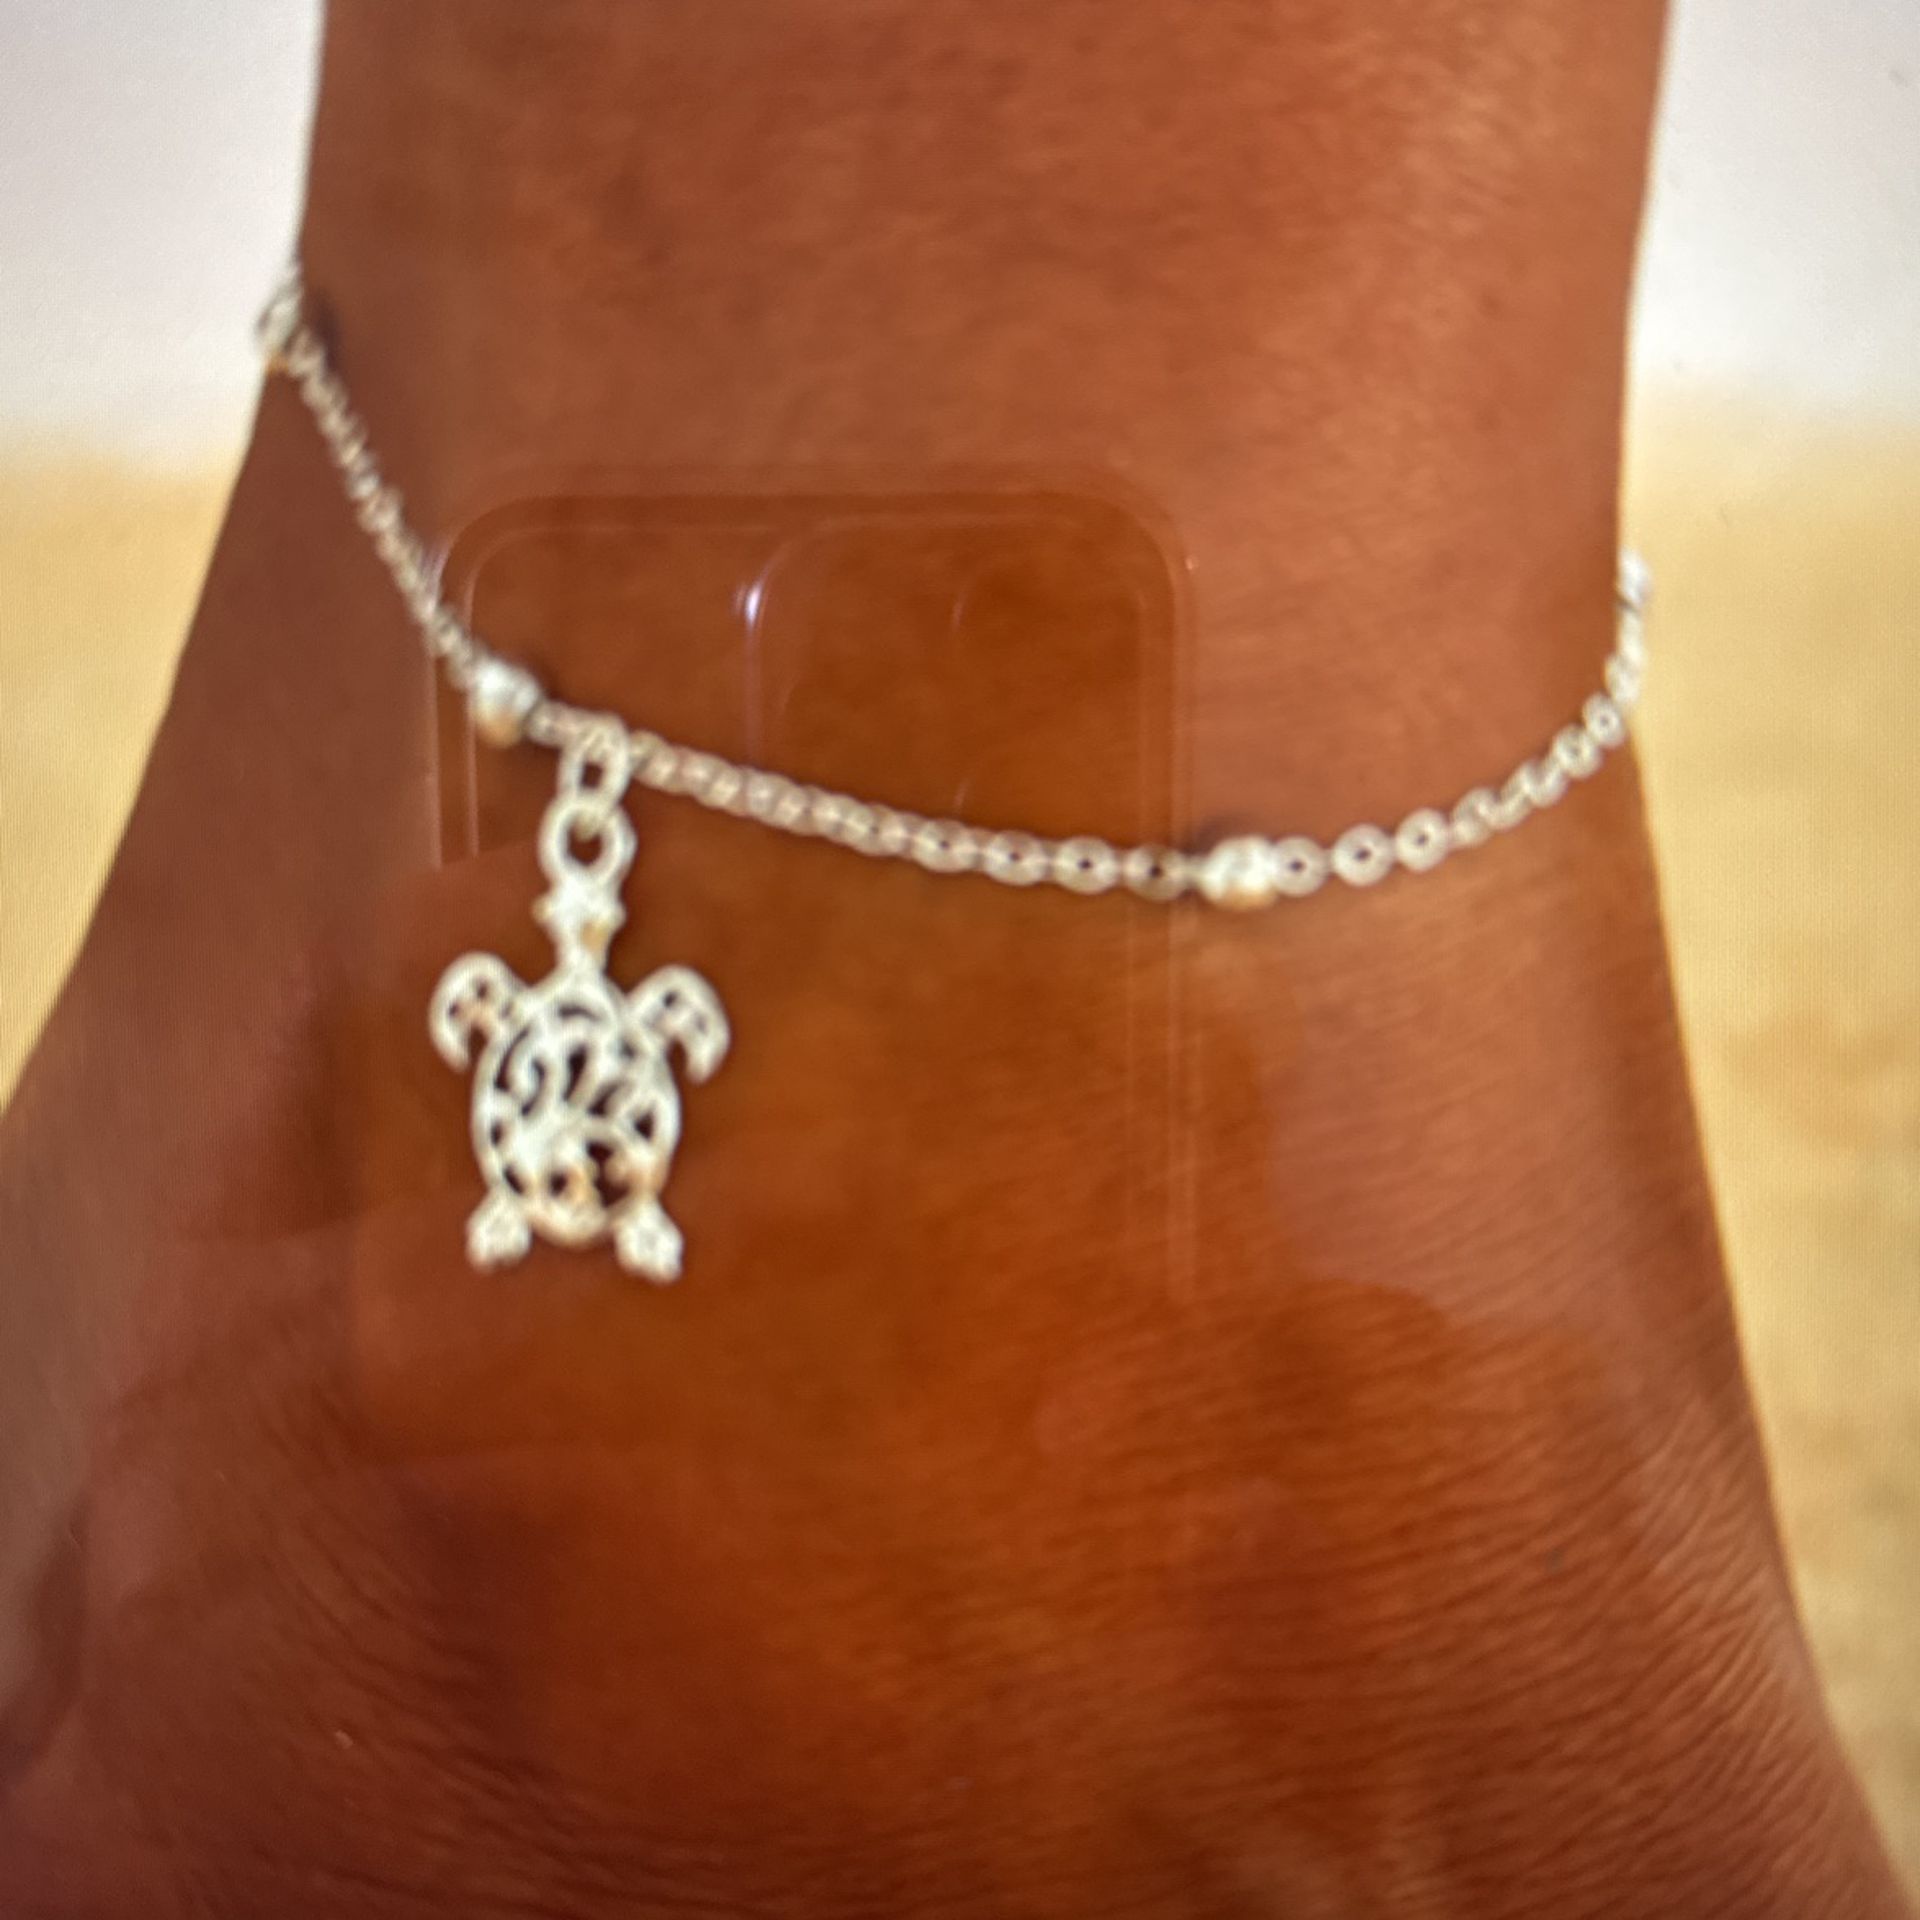 New Turtle Pendants And Chain Anklet Super Cute